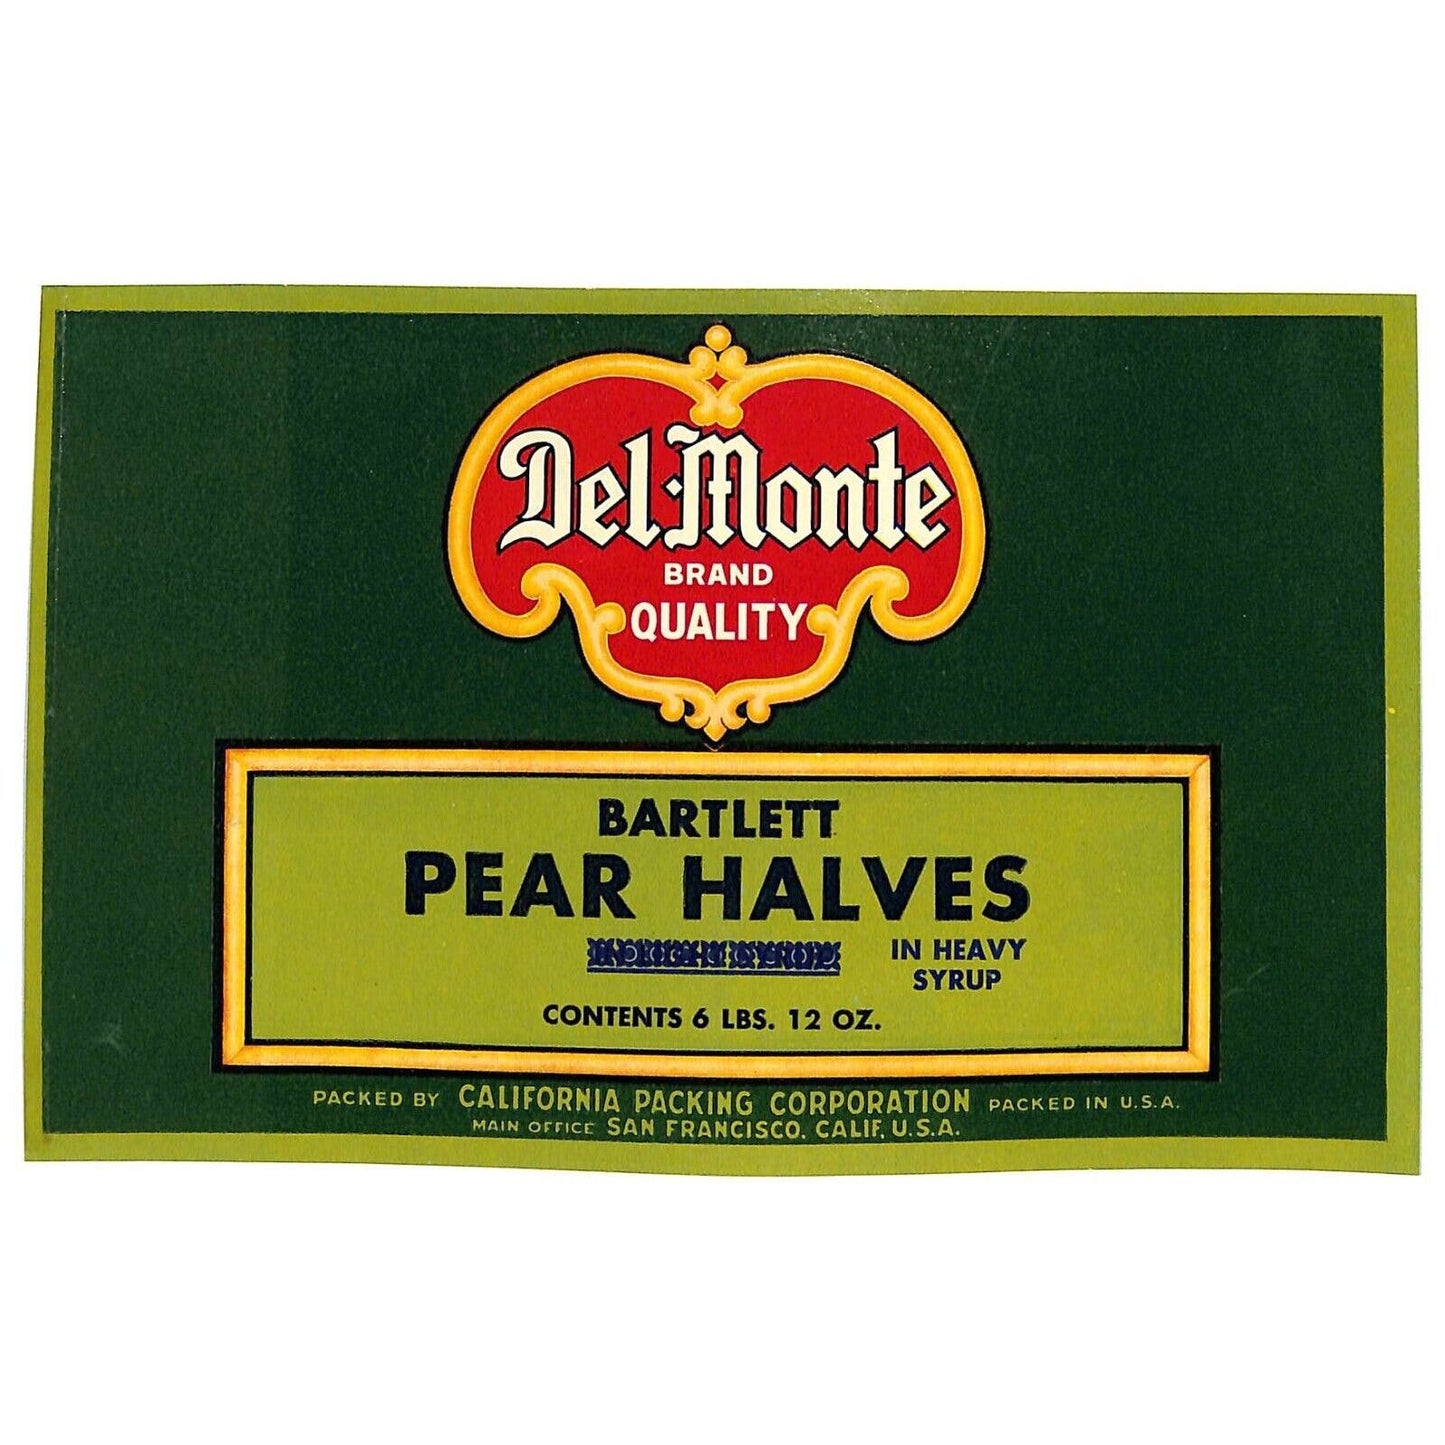 1945 Paper Can Label Del Monte Brand Bartlett Pear Halves Heavy Syrup VGC